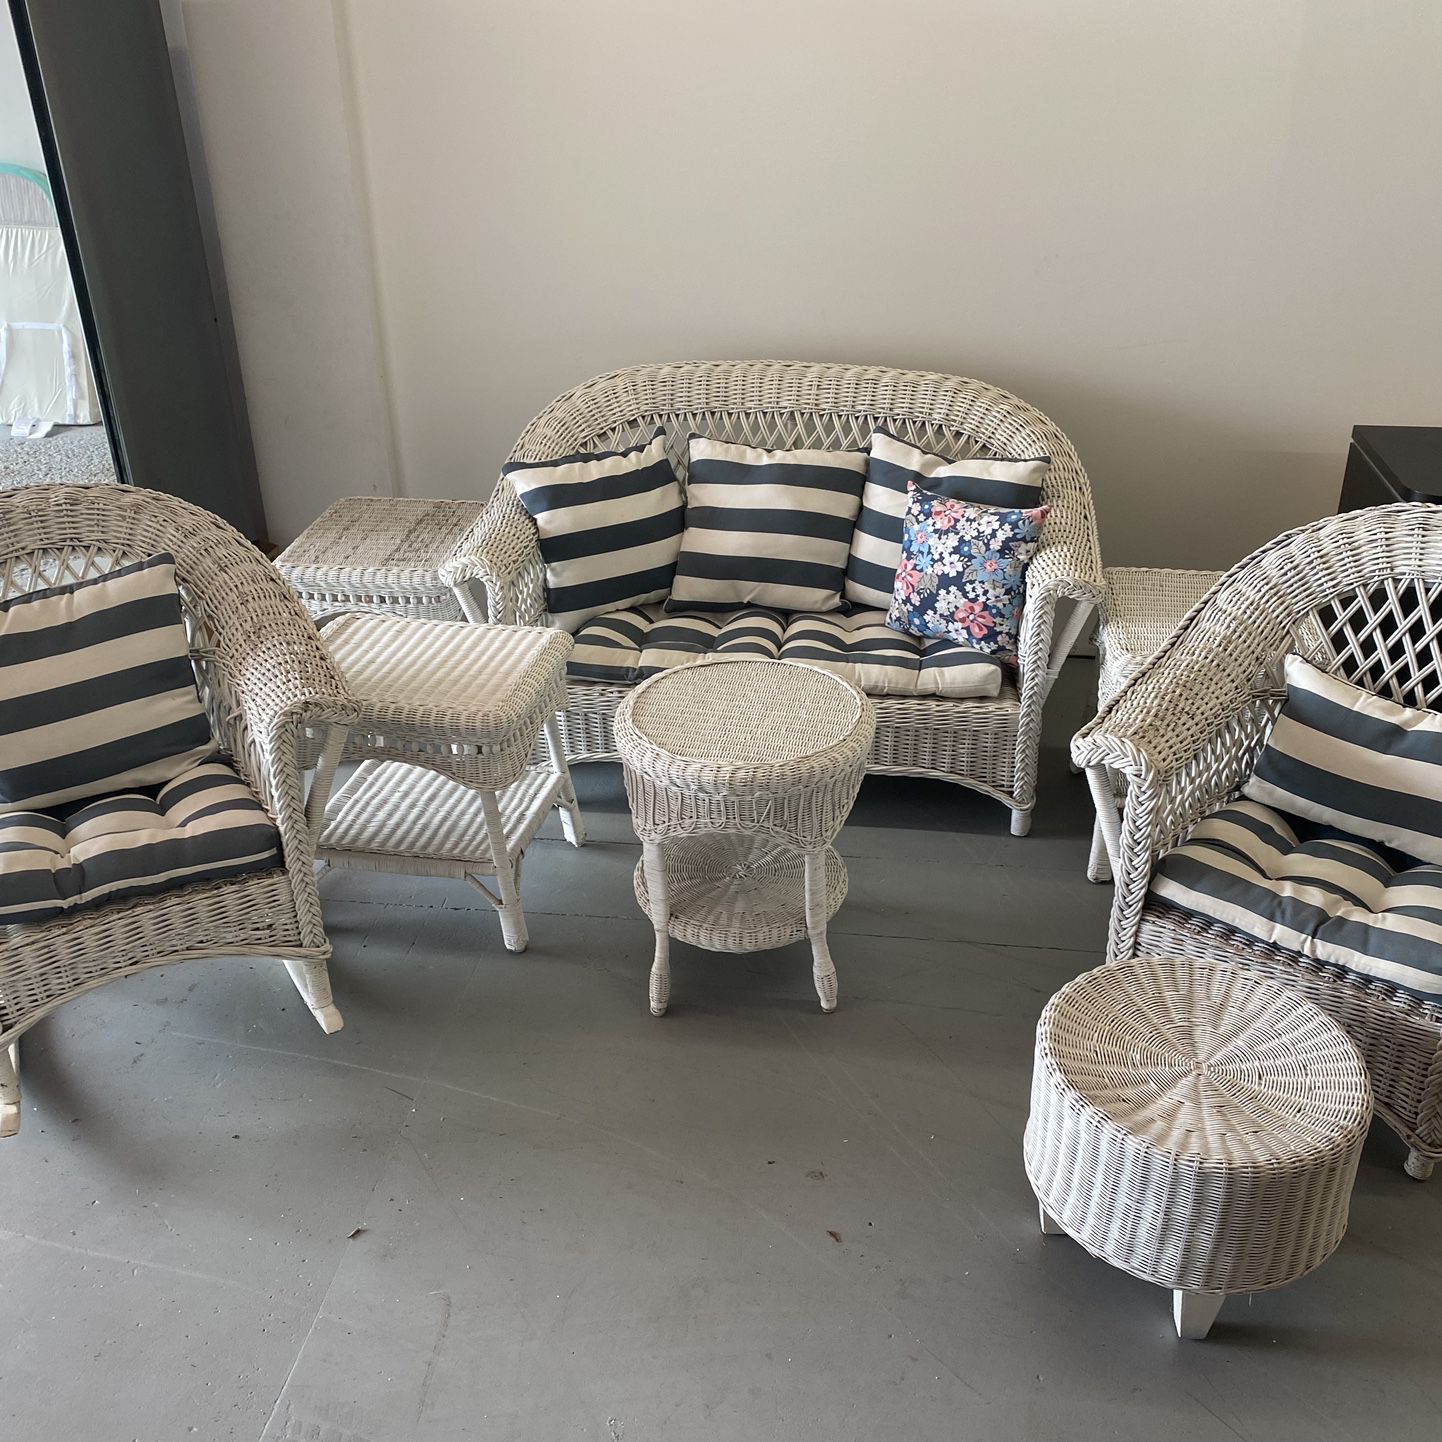 8 PIECE WICKER SET with Cushions 